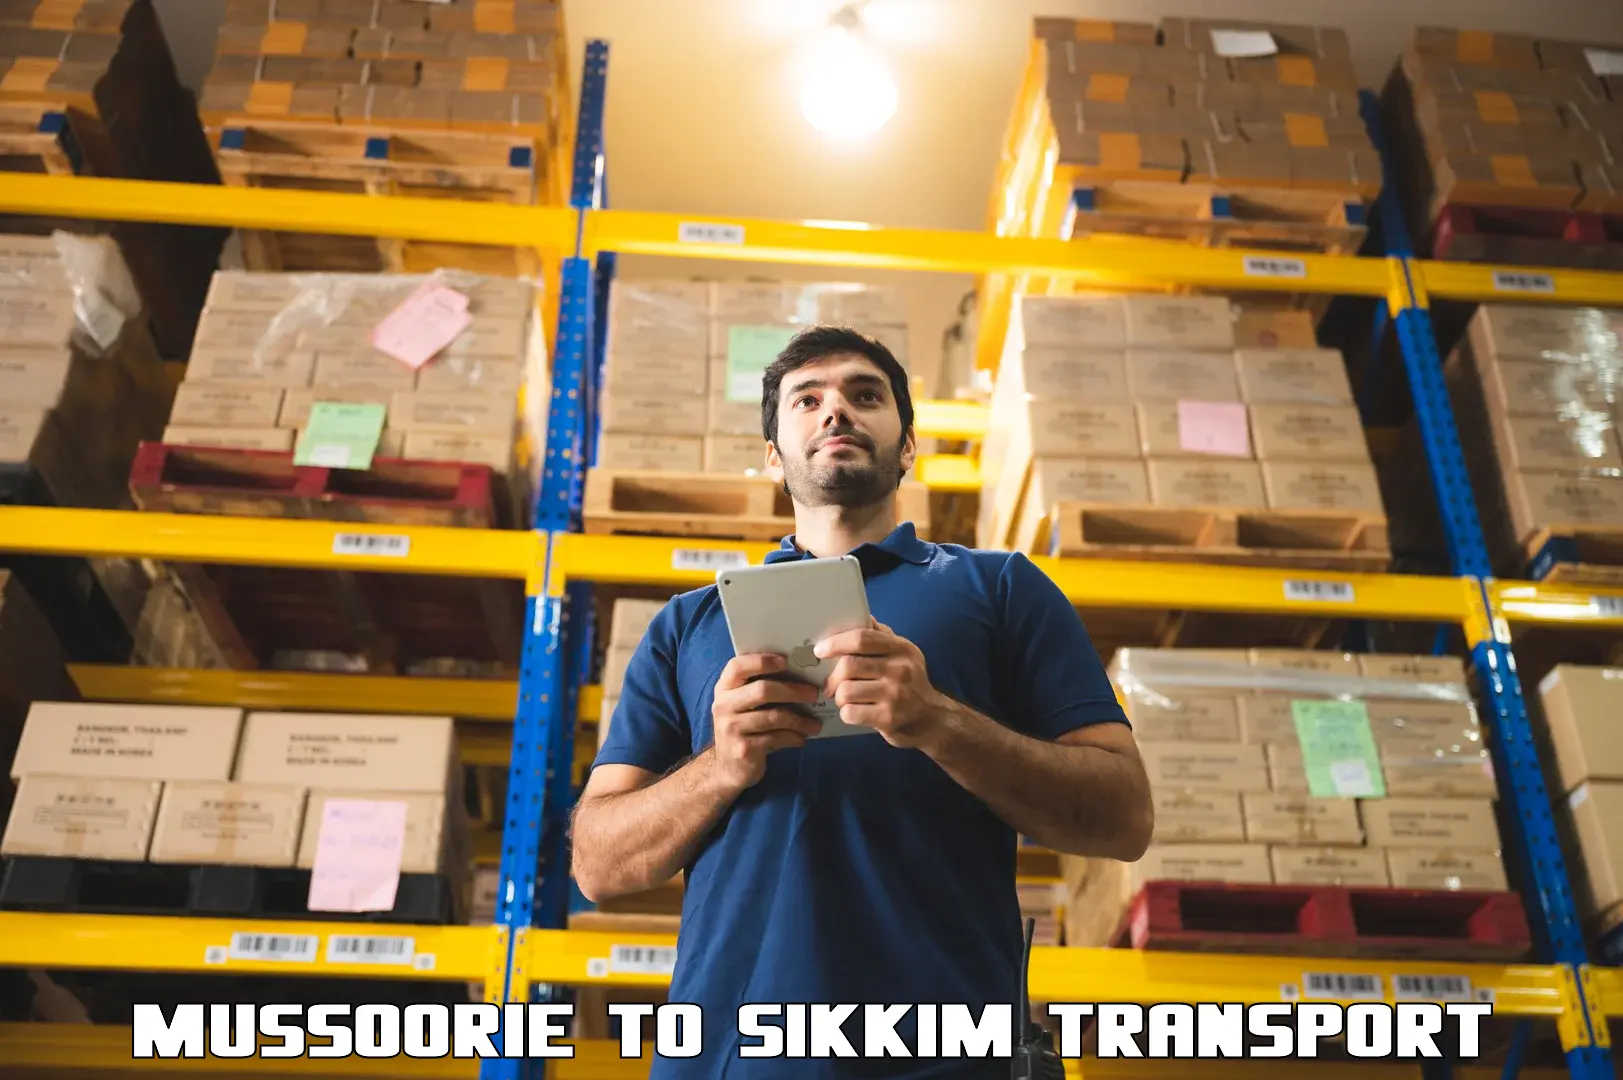 Shipping partner Mussoorie to West Sikkim